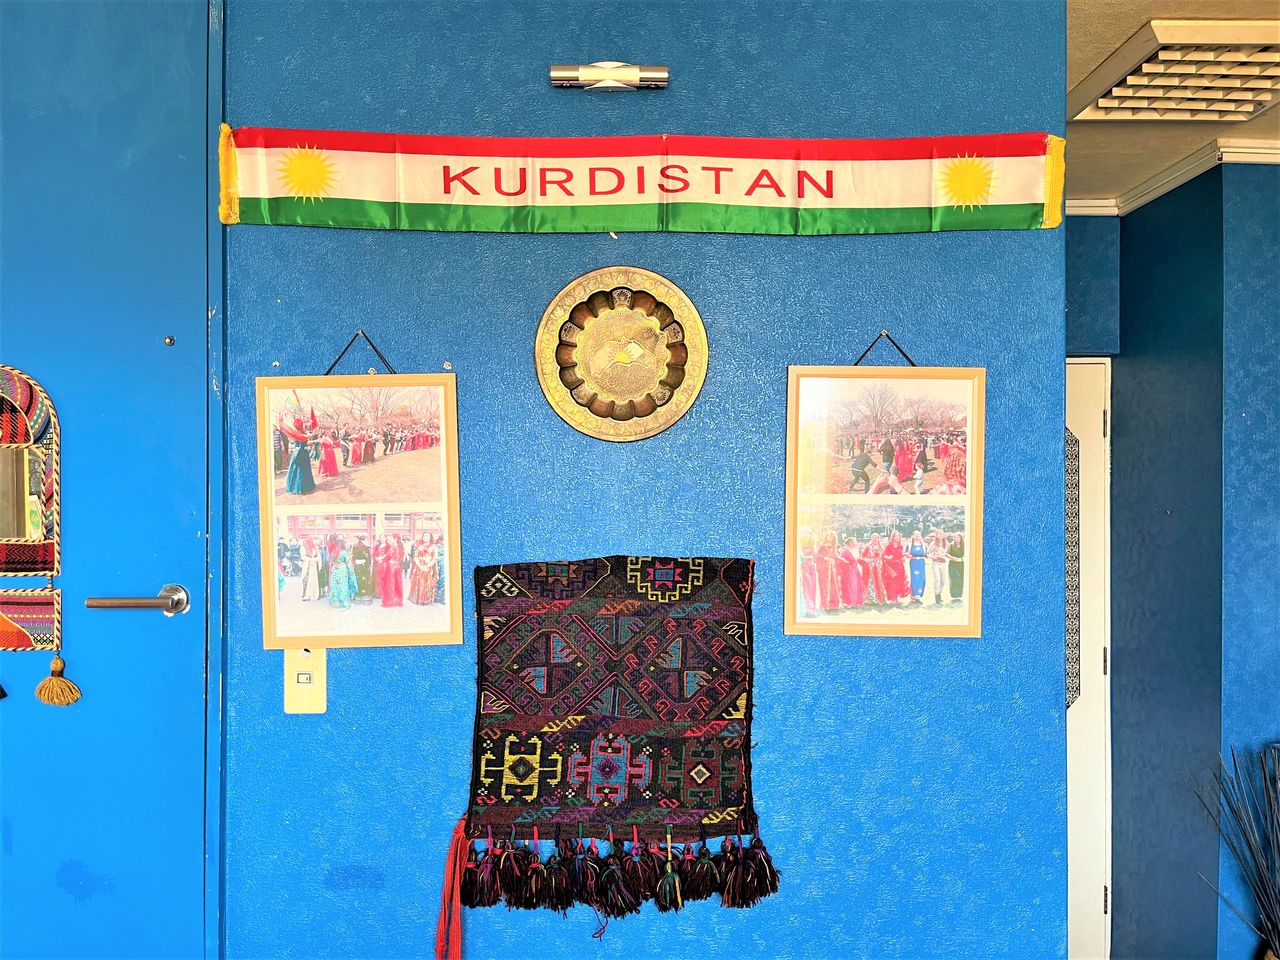 The restaurant also offers exhibits on Kurdish culture.  The flag with red, green and white stripes covered with a sunbeam is that of Kurdistan.